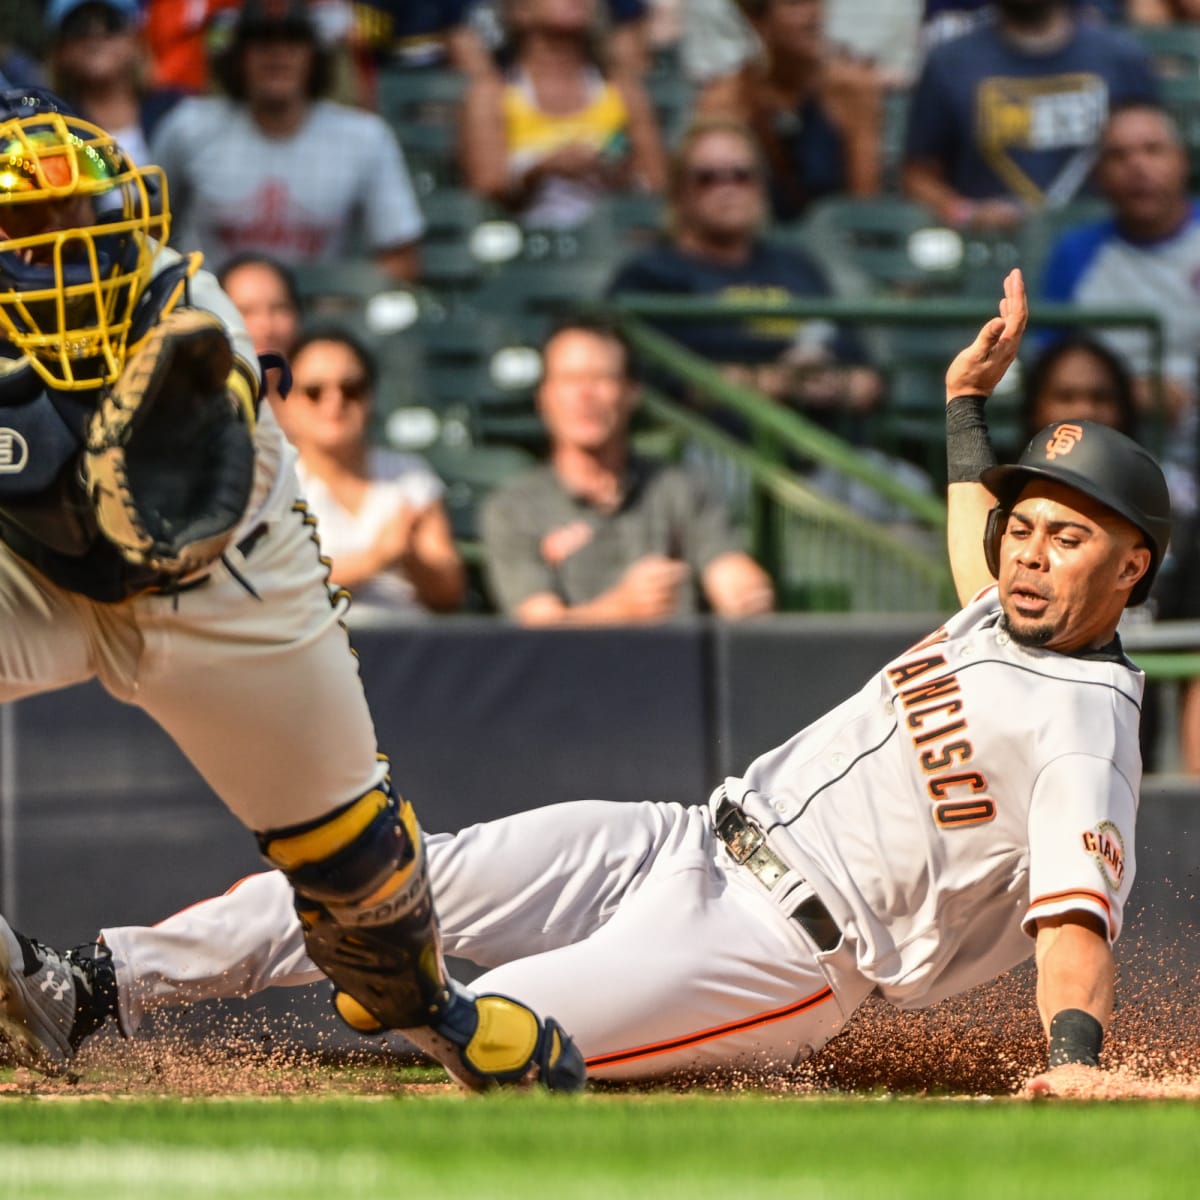 LaMonte Wade Jr. - MLB First base - News, Stats, Bio and more - The Athletic